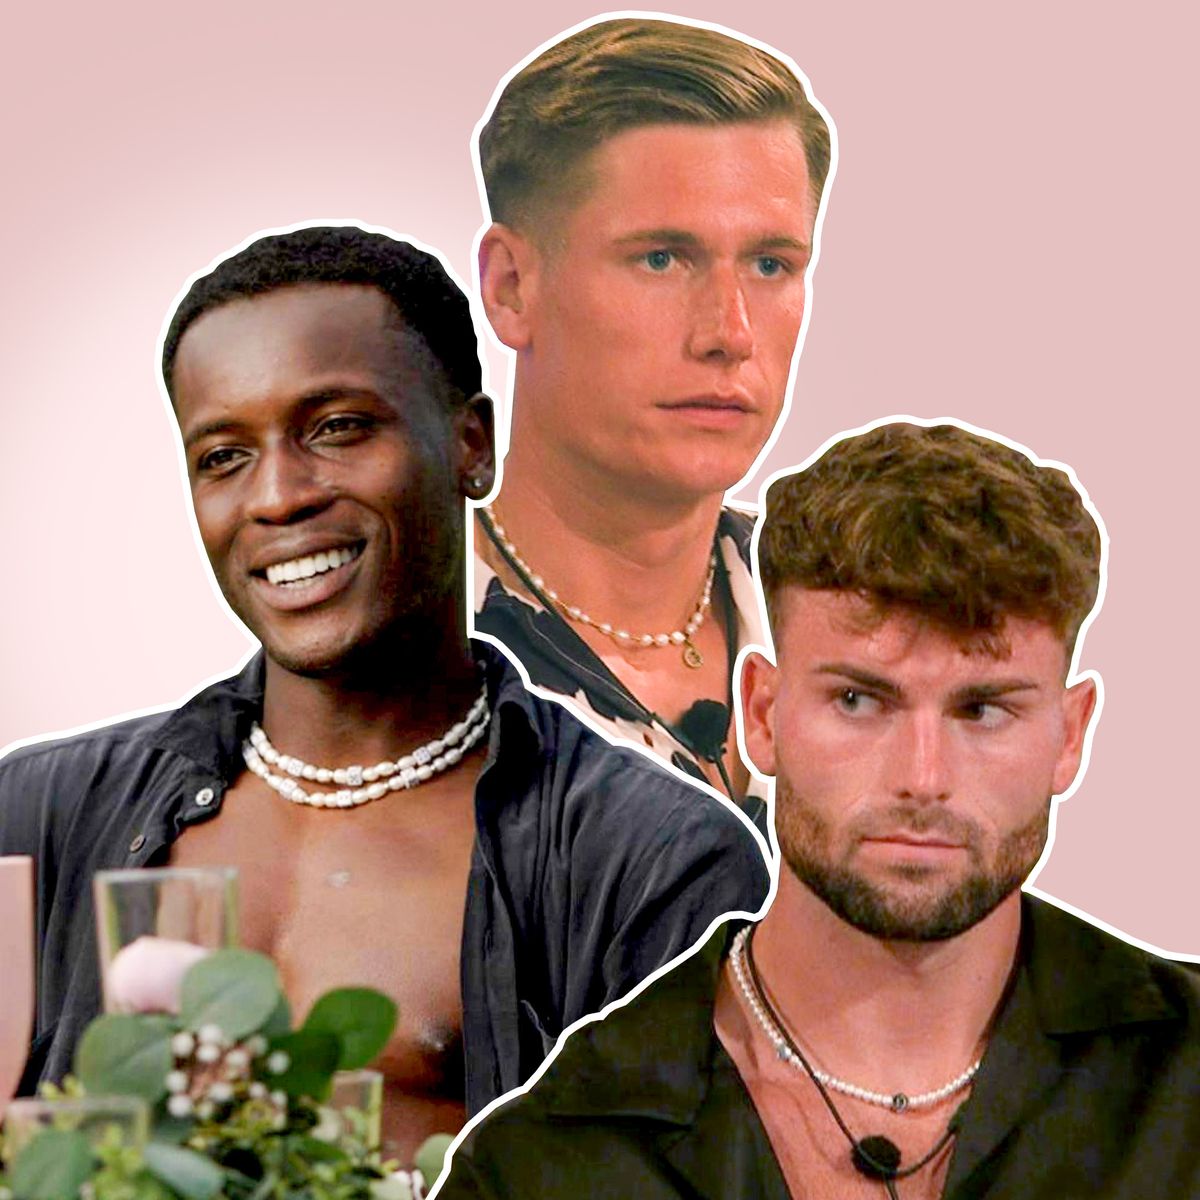 Breaking the Norm: Why Are Guys Wearing Pearl Necklaces - MY PEARL